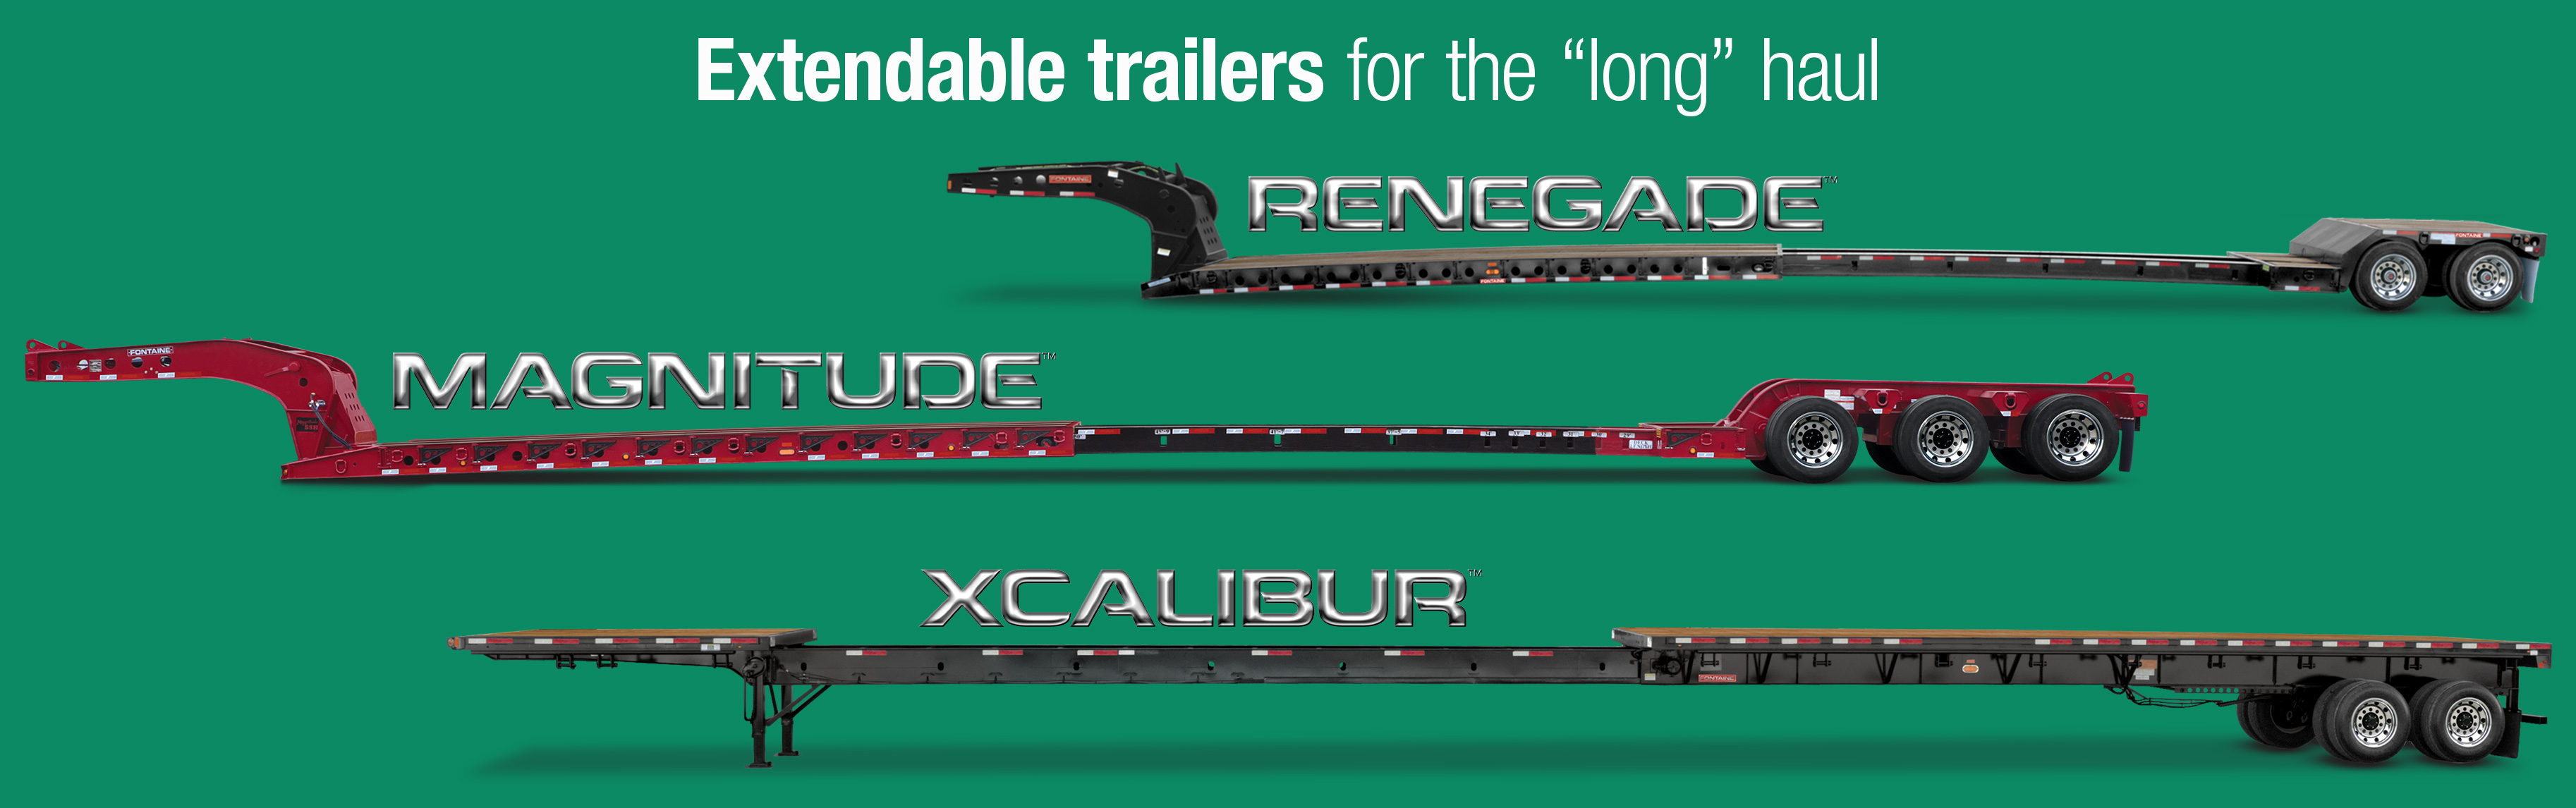 Fontaine Heavy Haul Extendable Trailers